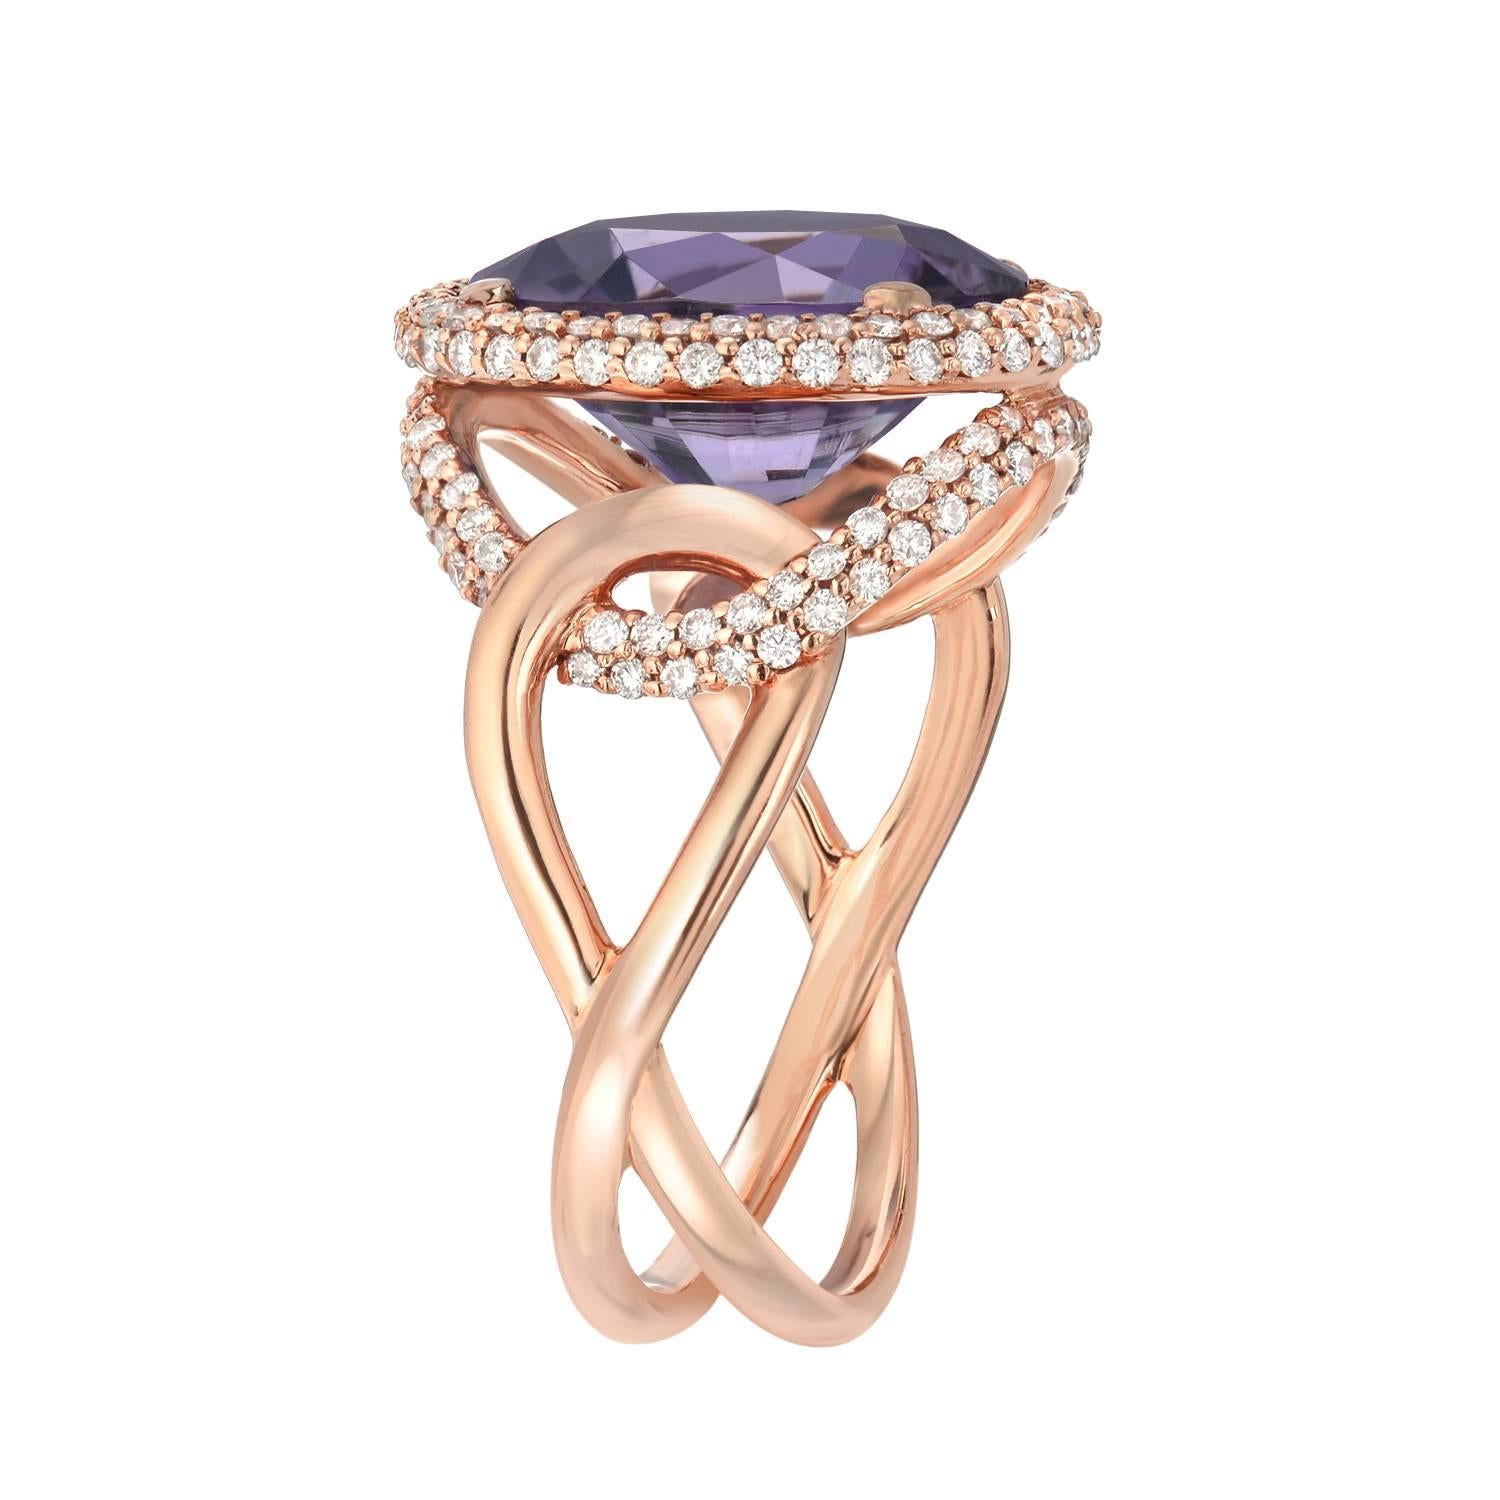 A rare and electric 5.59ct oval Lavender Tourmaline, is set in this gorgeous 18K rose gold ring, micro-set with a total of 0.86ct diamonds. 
Size 6.5. Re-sizing is complimentary upon request.